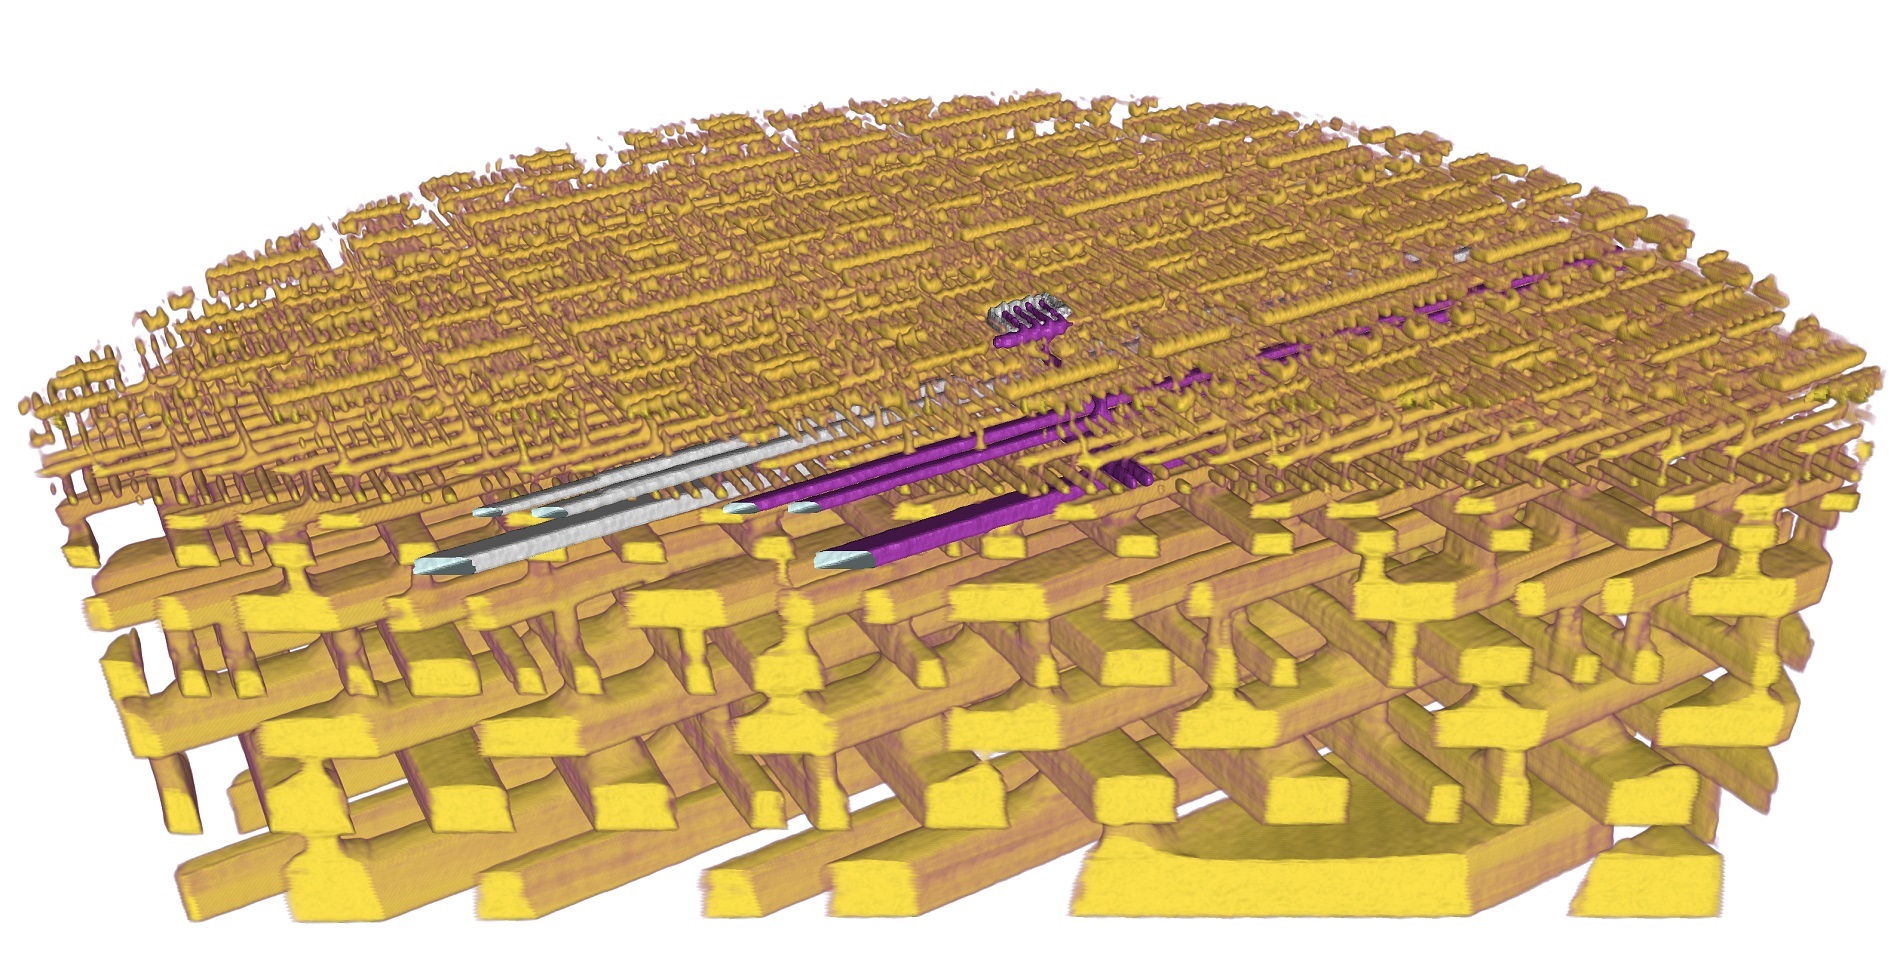 3-D representation of the internal structure of a microchip